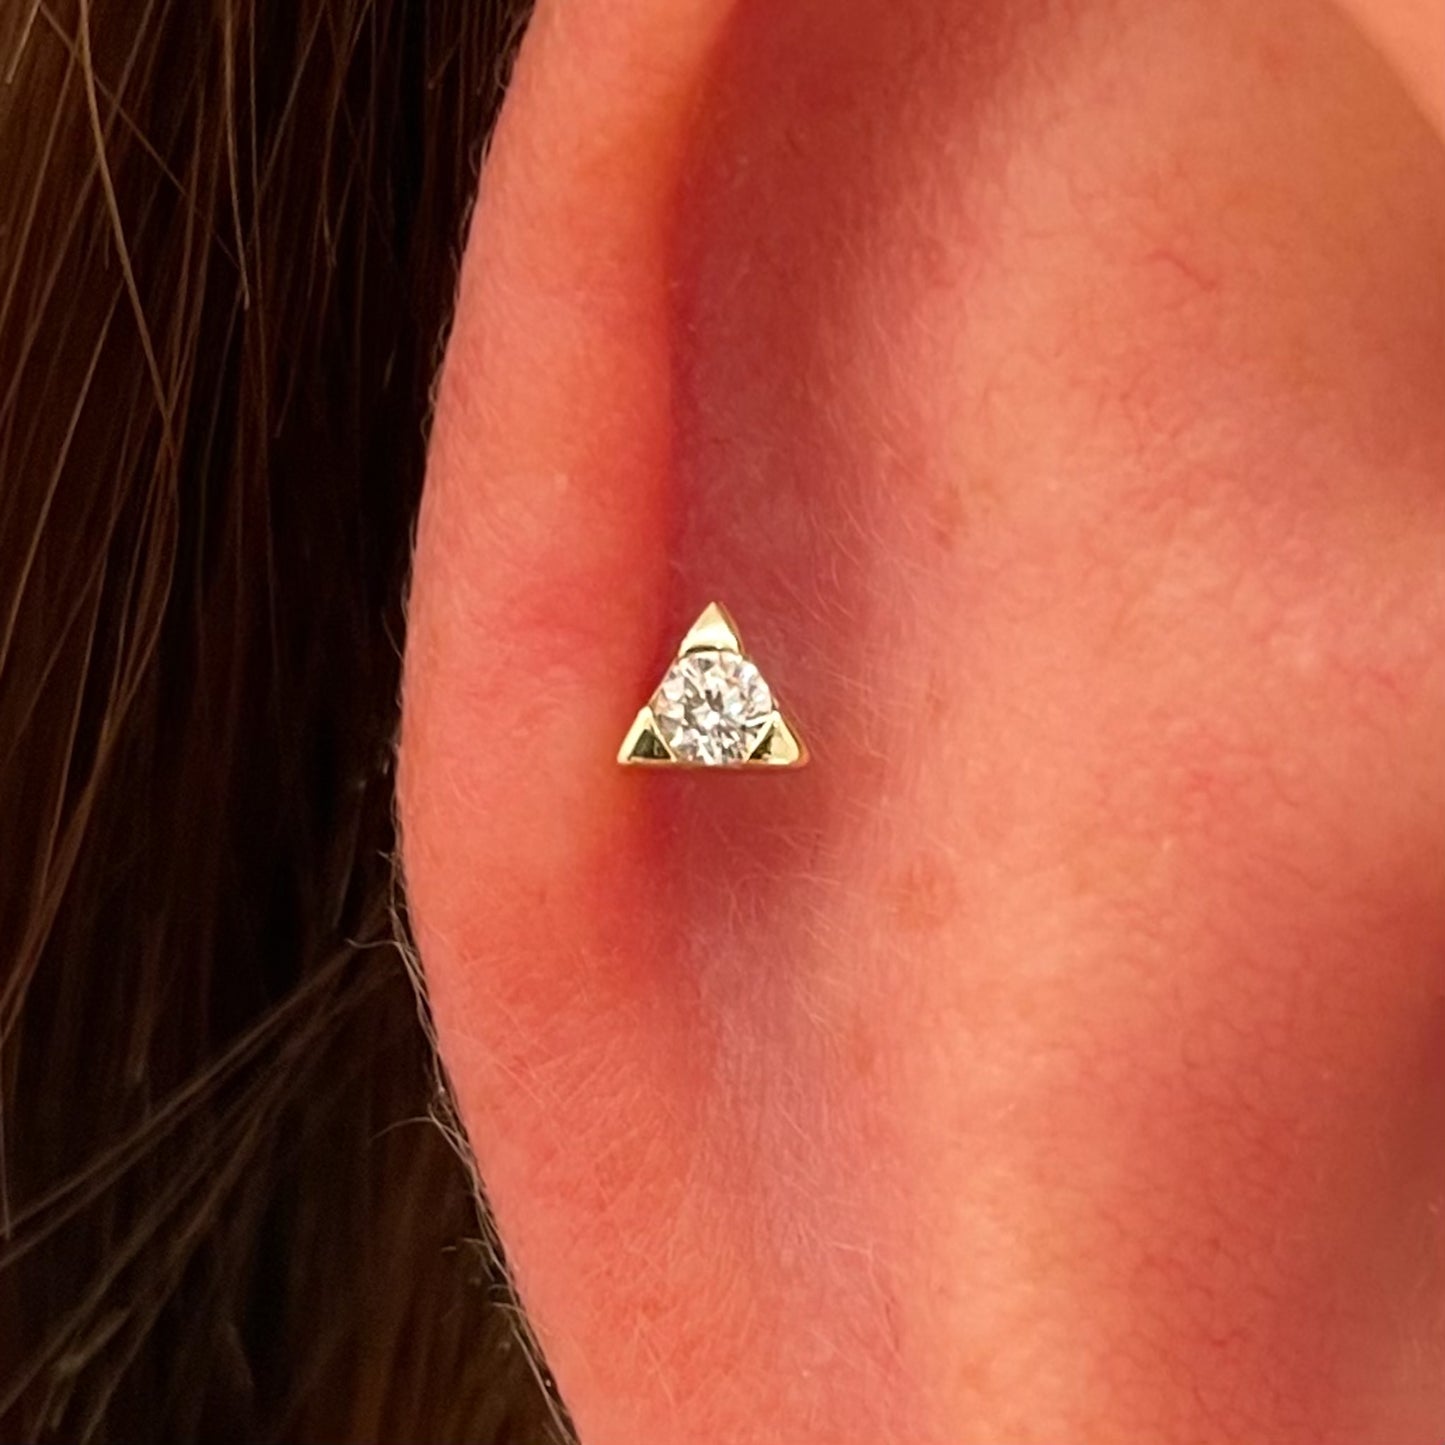 14k solid yellow gold tiny triangle Celeste crystal flat back labret stud earring 8mm